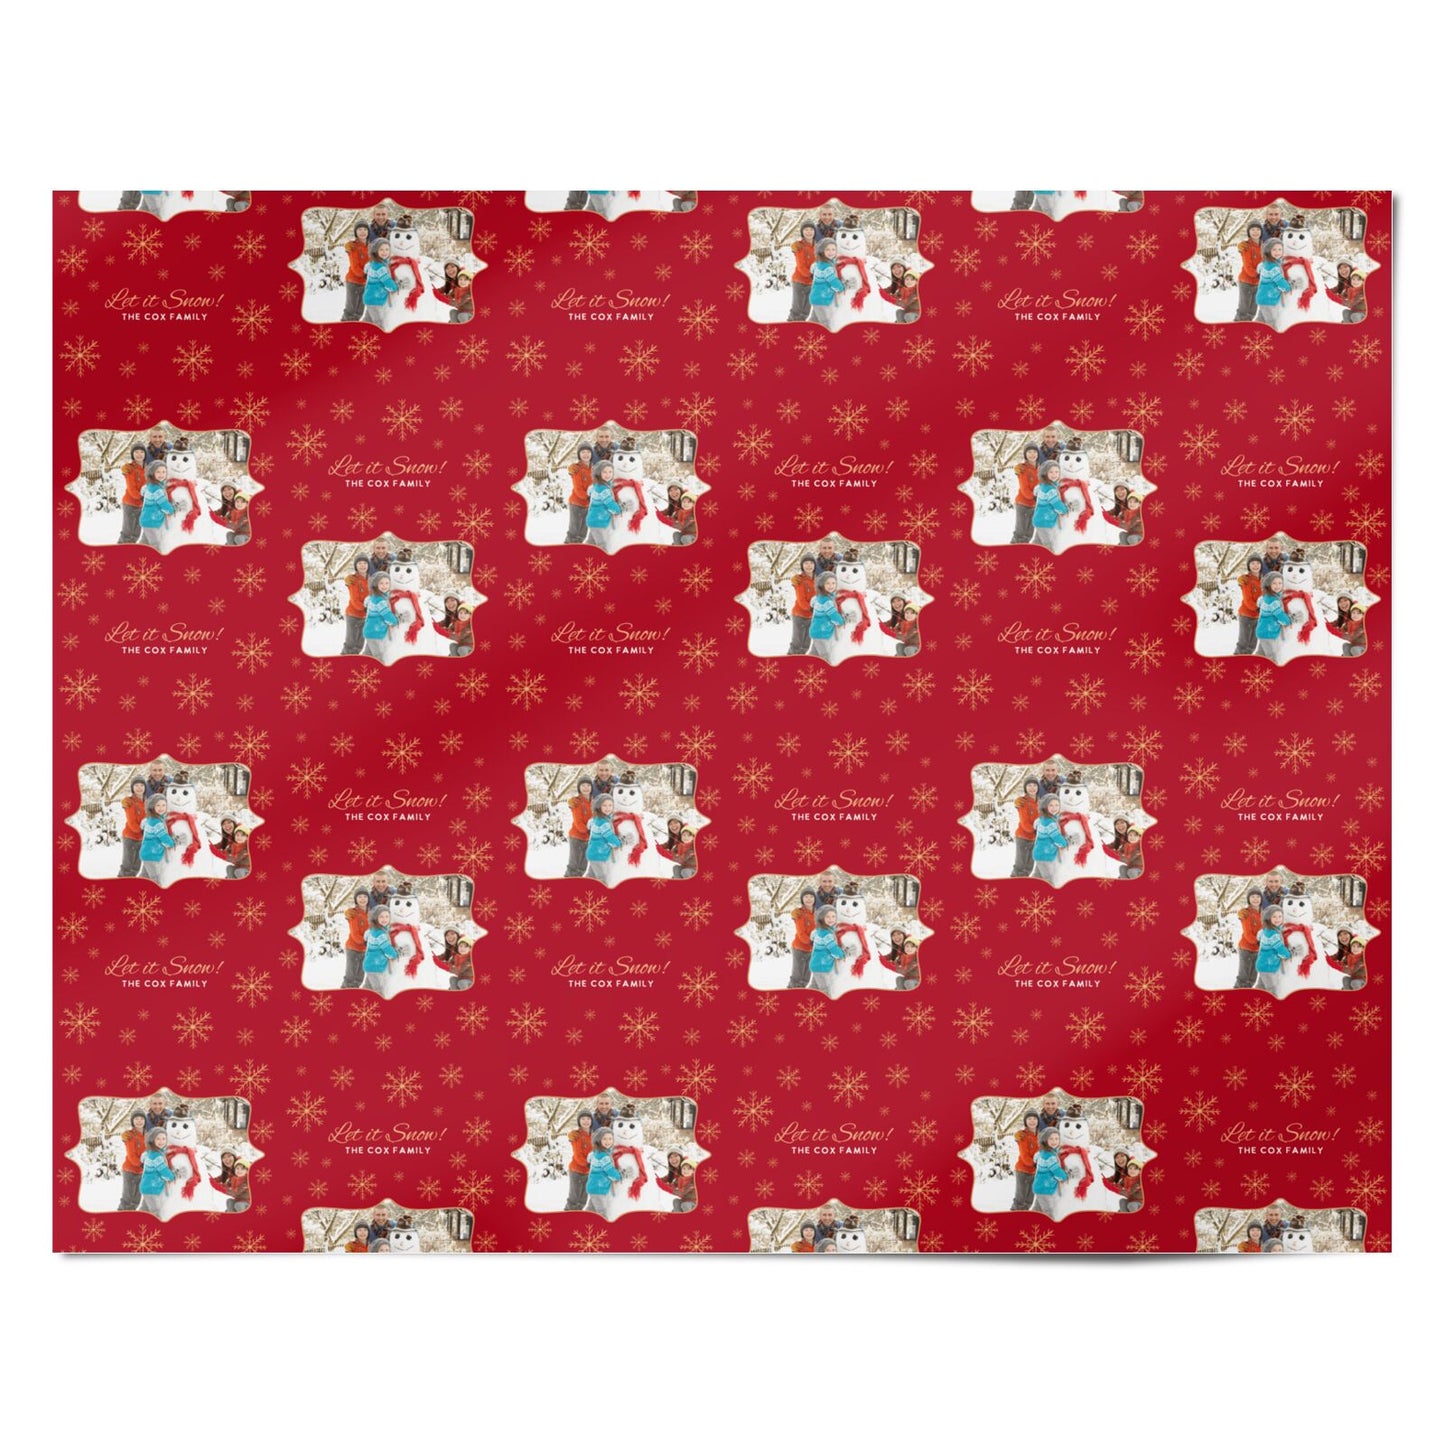 Let it Snow Christmas Photo Upload Personalised Wrapping Paper Alternative